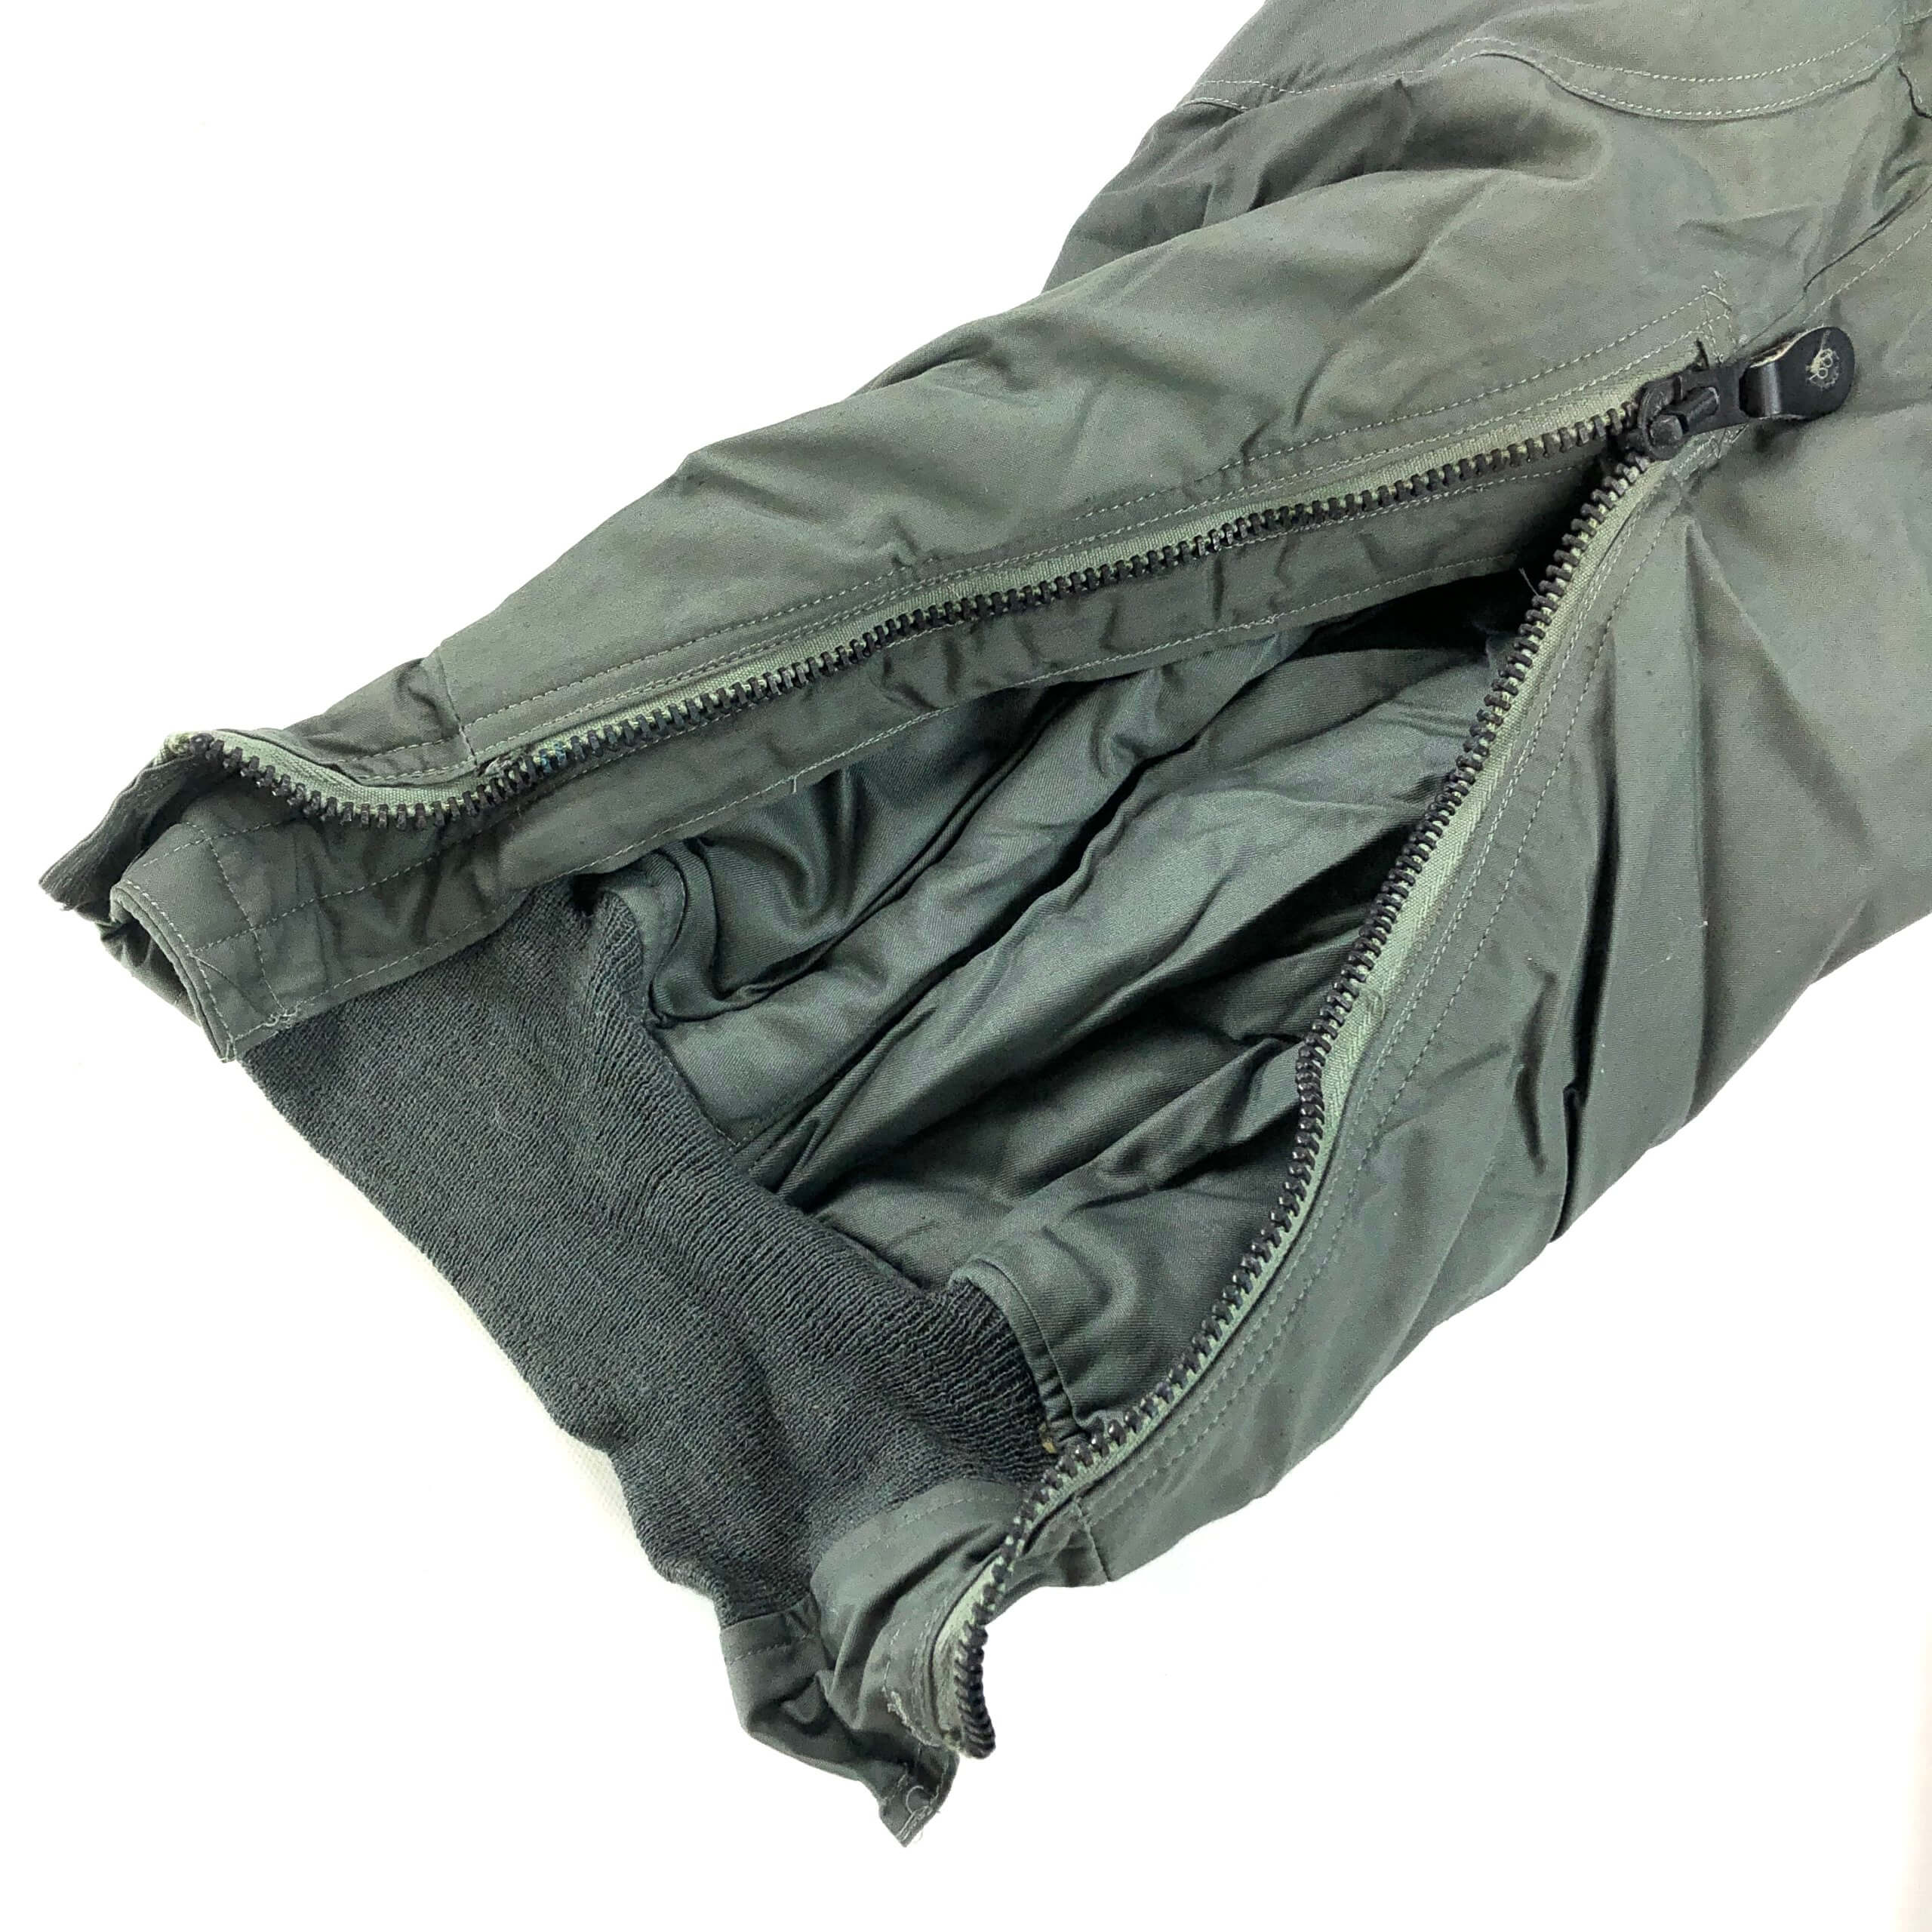 USAF Extreme Cold Weather Pants, F-1B